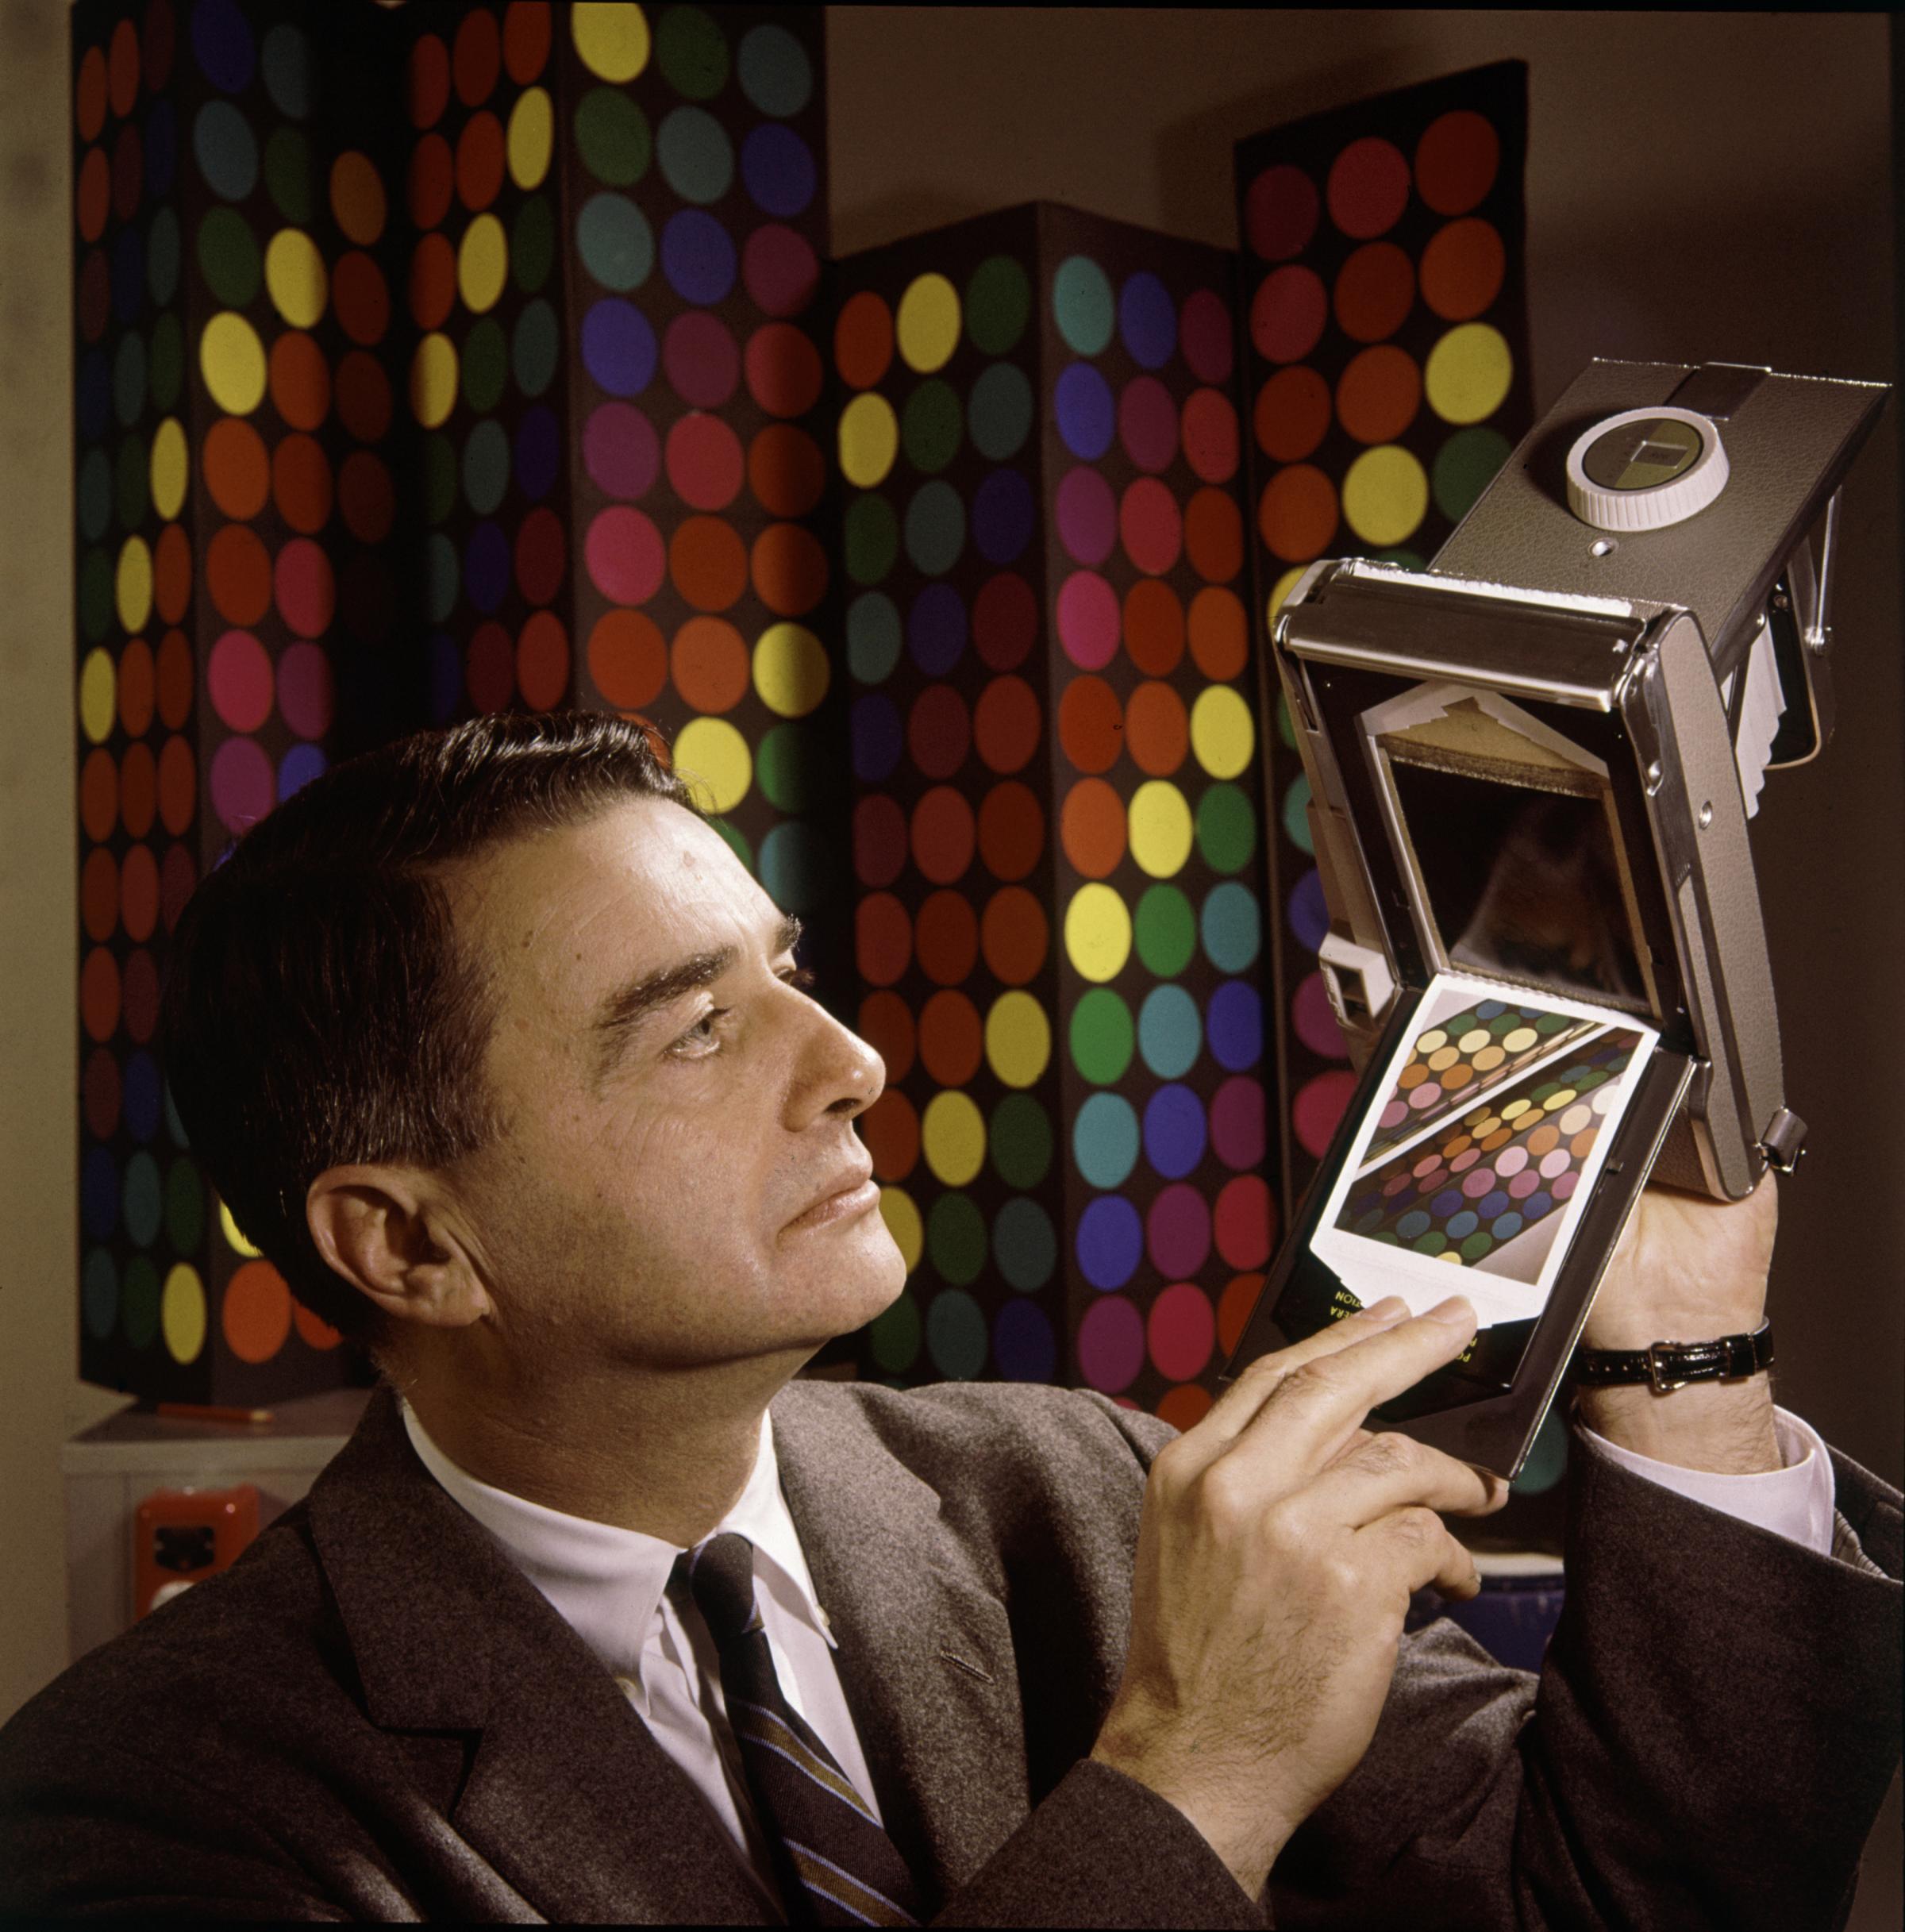 Edwin Land, the president and co-founder of the Polaroid Corporation, demonstrates his company's "60-second film" in 1963.